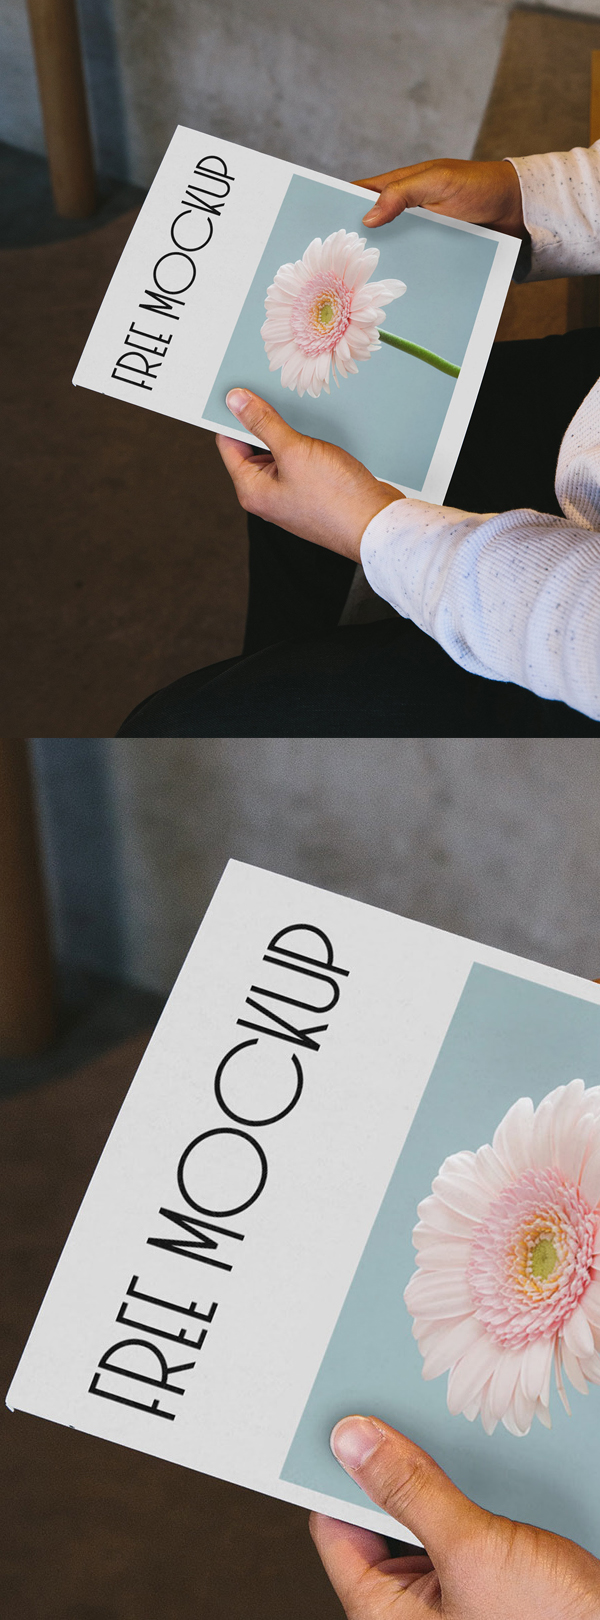 Free Magazine in Hands PSD Mockup